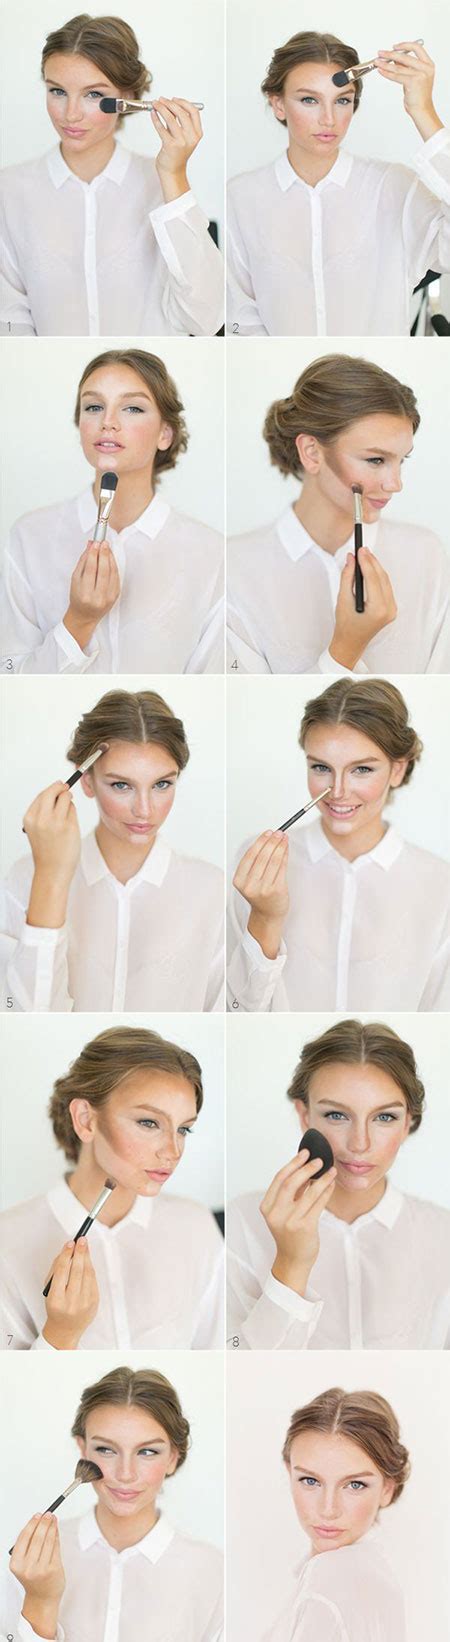 How to apply normal makeup step by step. 12+ Easy Step By Step Natural Eye Make Up Tutorials For ...